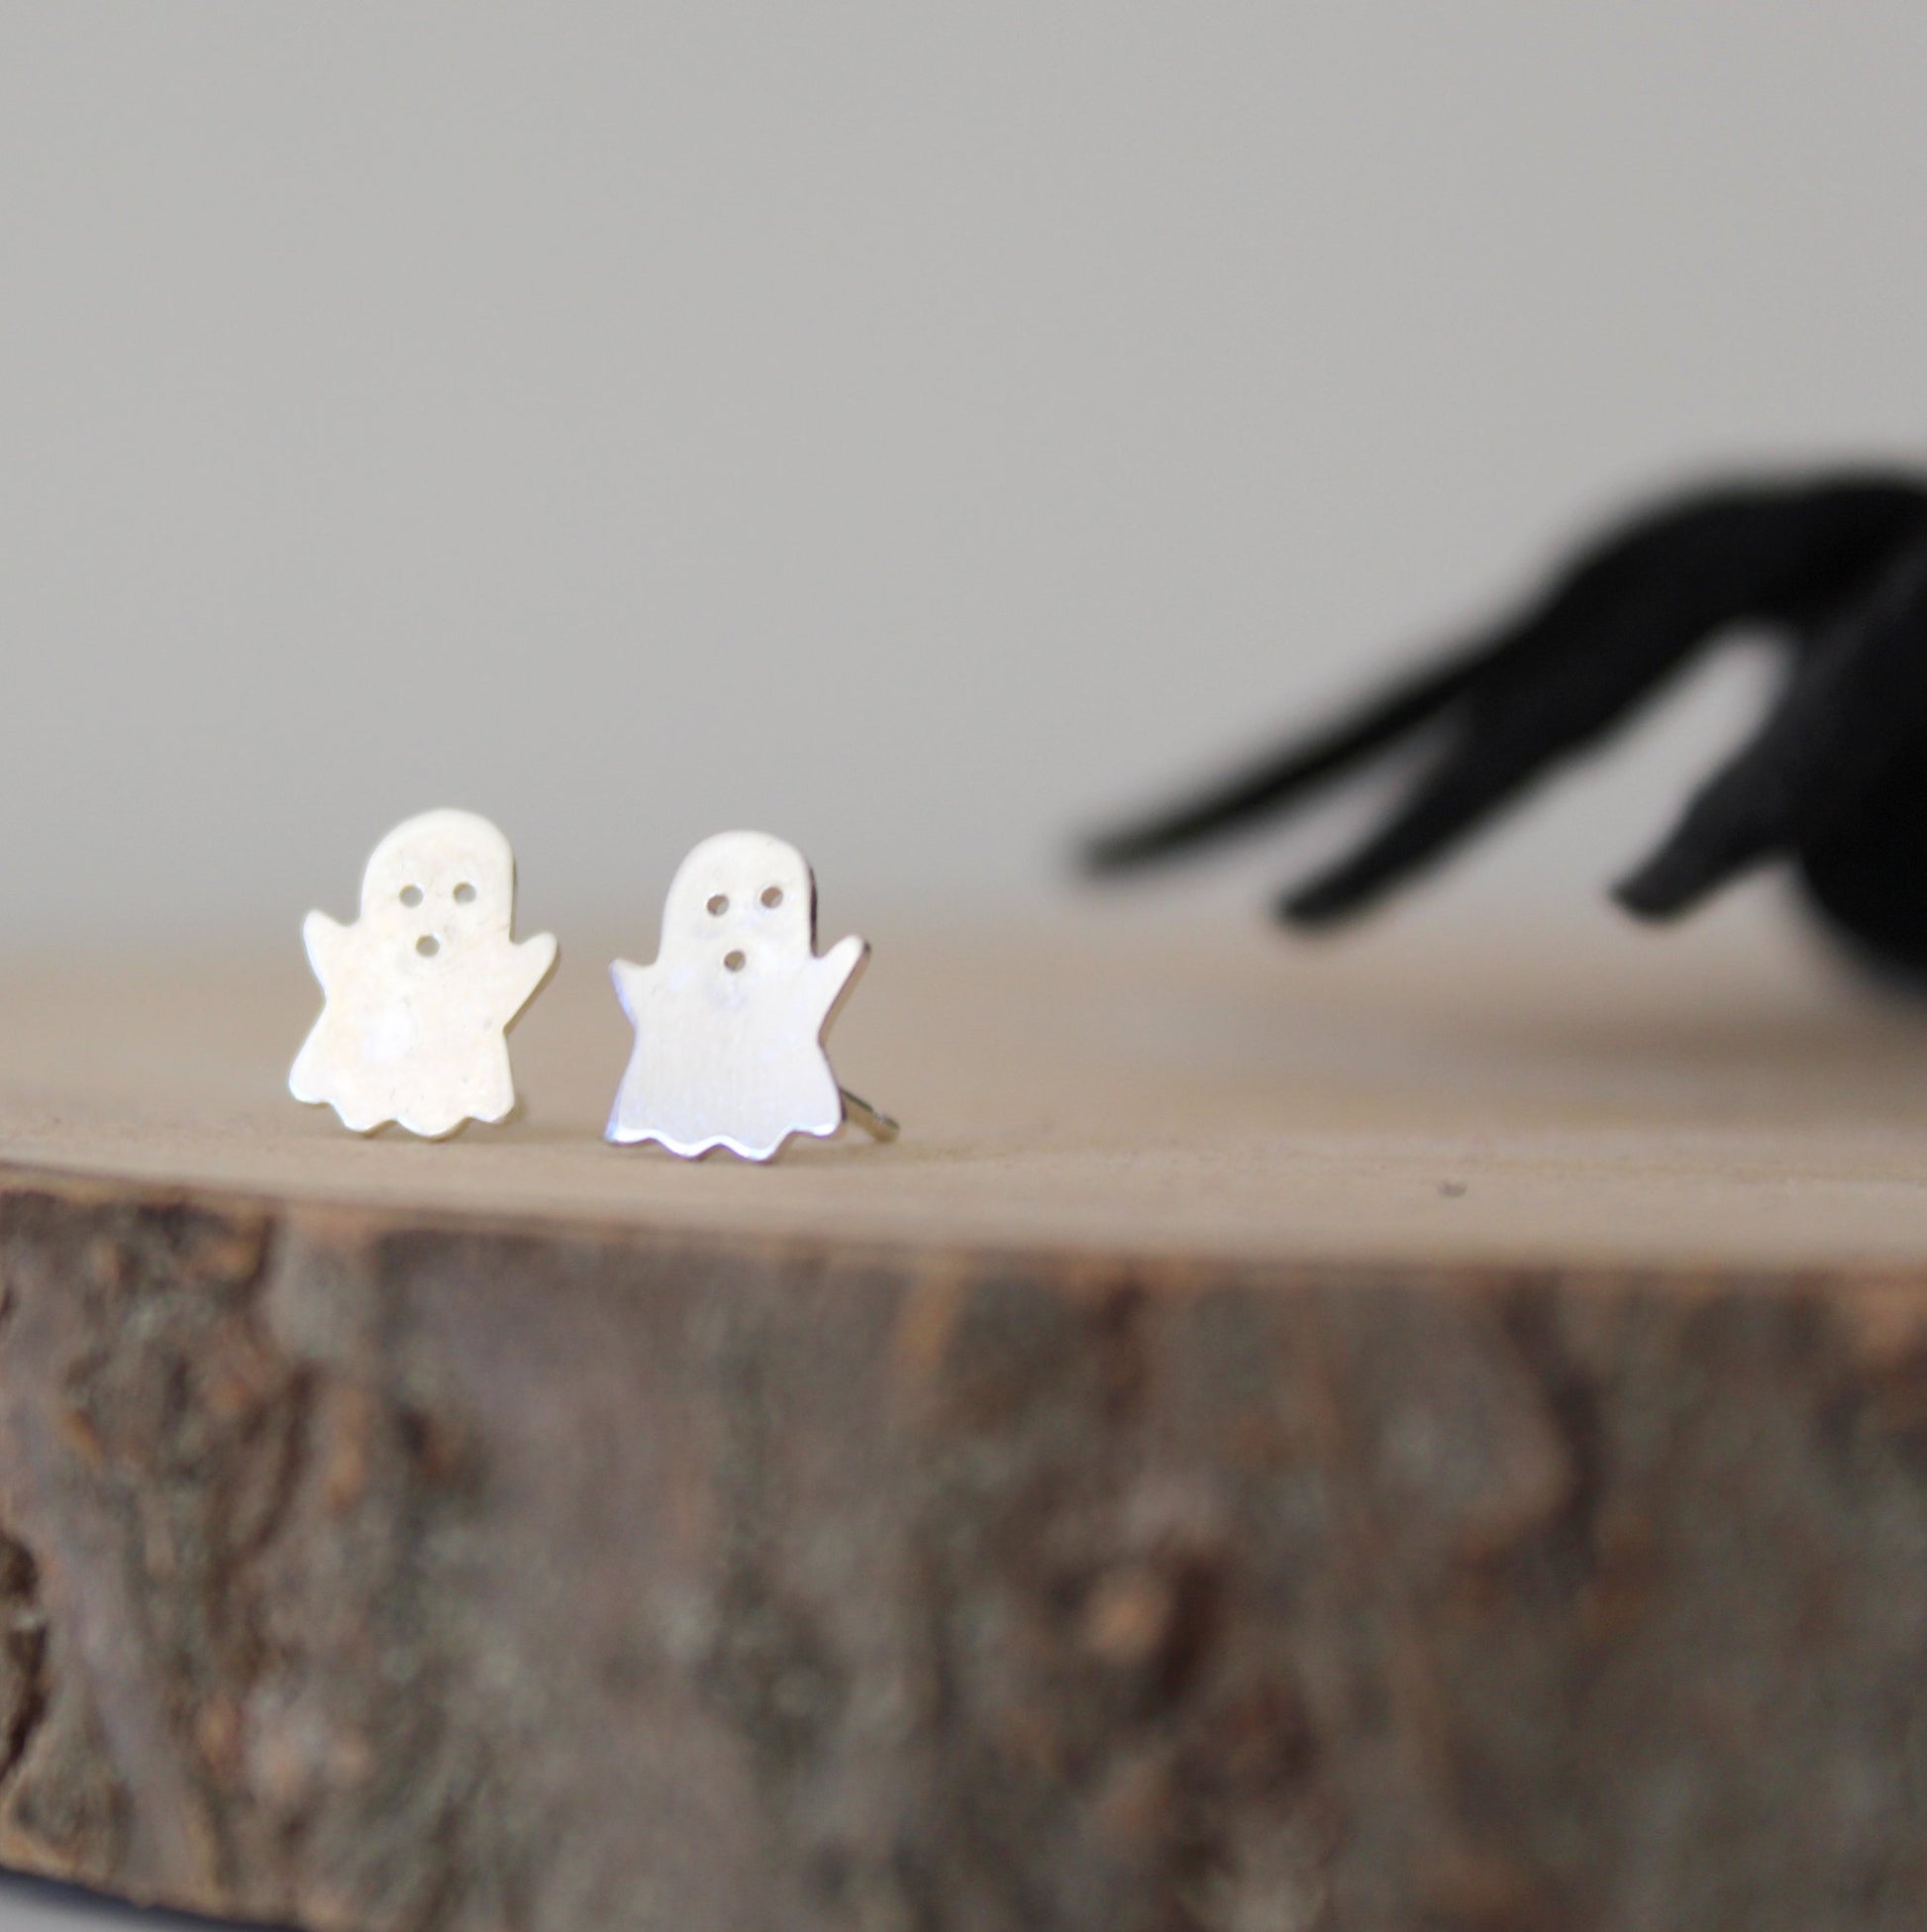 Mismatched Sterling Silver Ghost Earrings - Shine On Shop